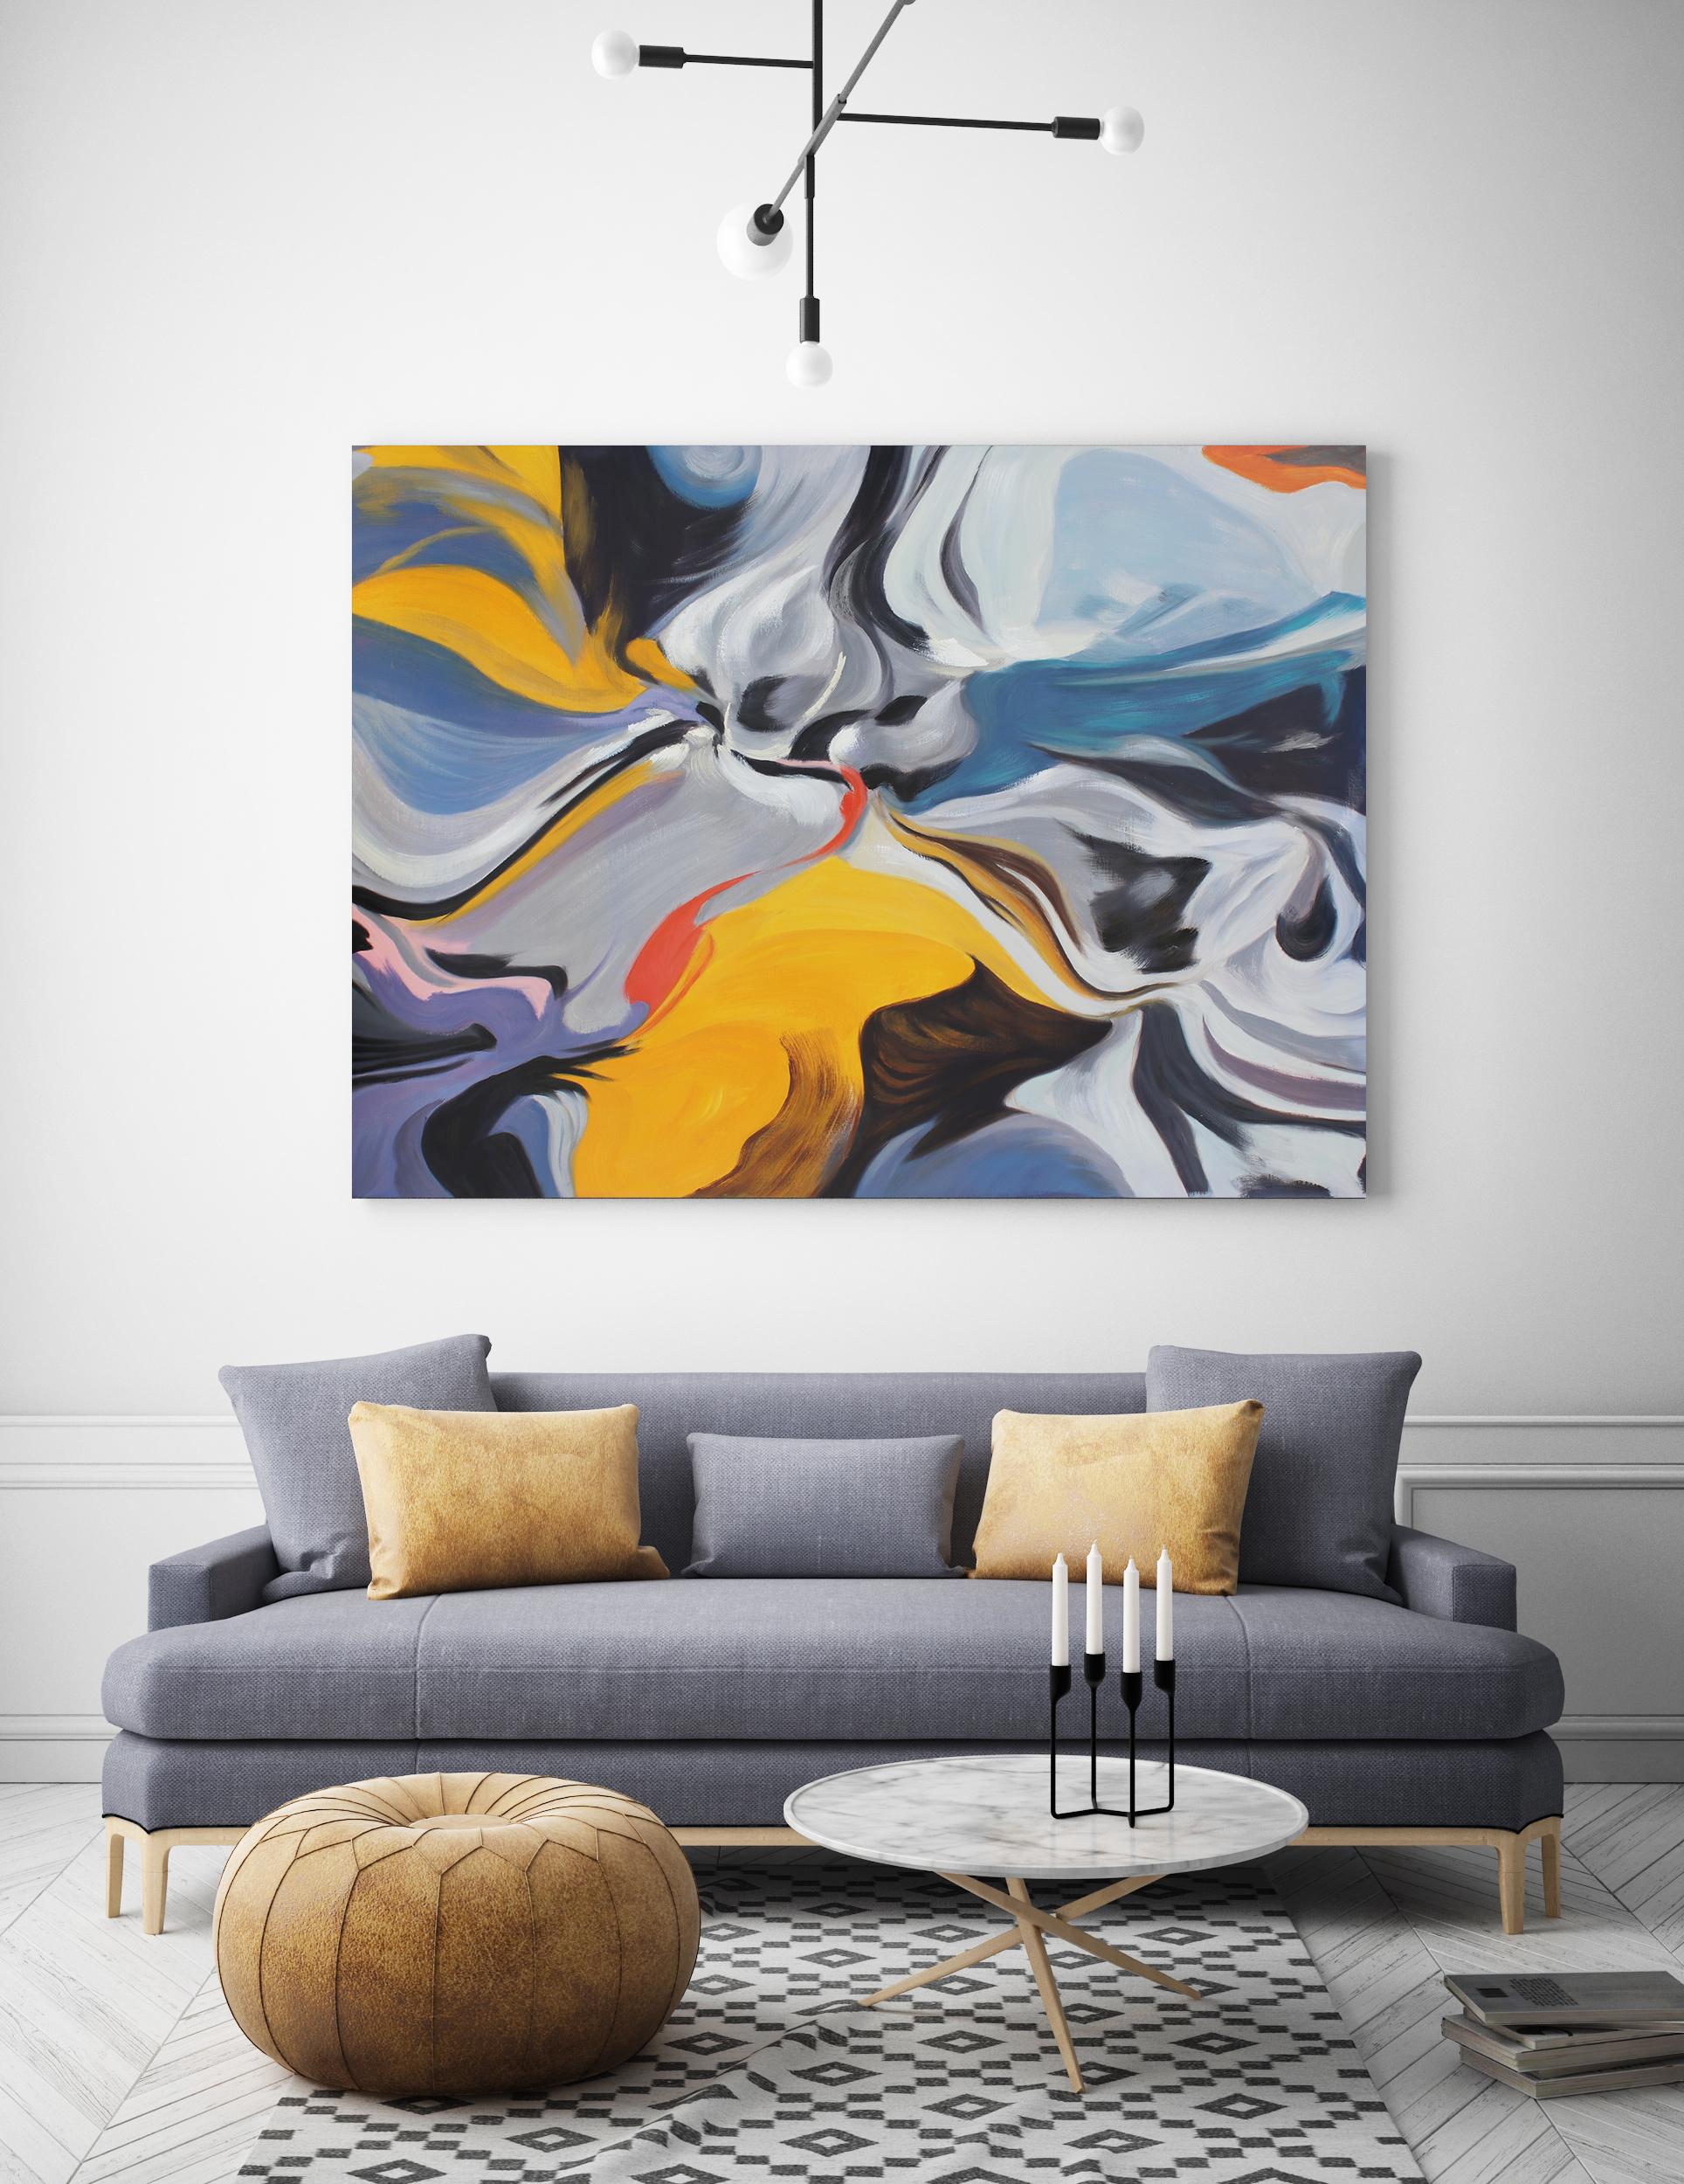 Irena Orlov Interior Painting - Abstract Yellow Blue Gray Acrylic Painting, 48W X 36"H, Independence of Reality